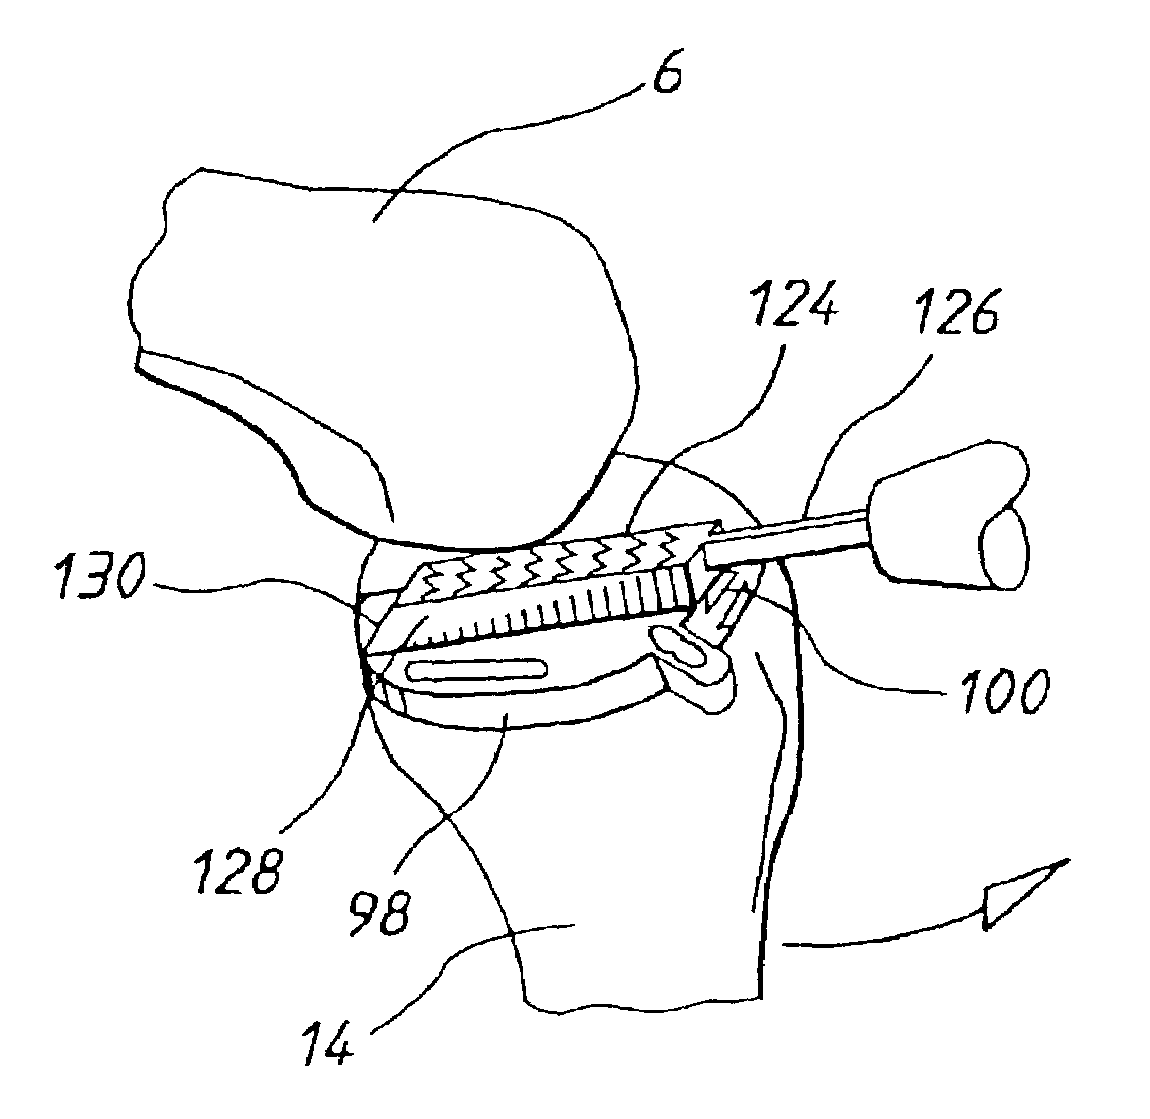 Apparatus for use in arthroplasty of the knees